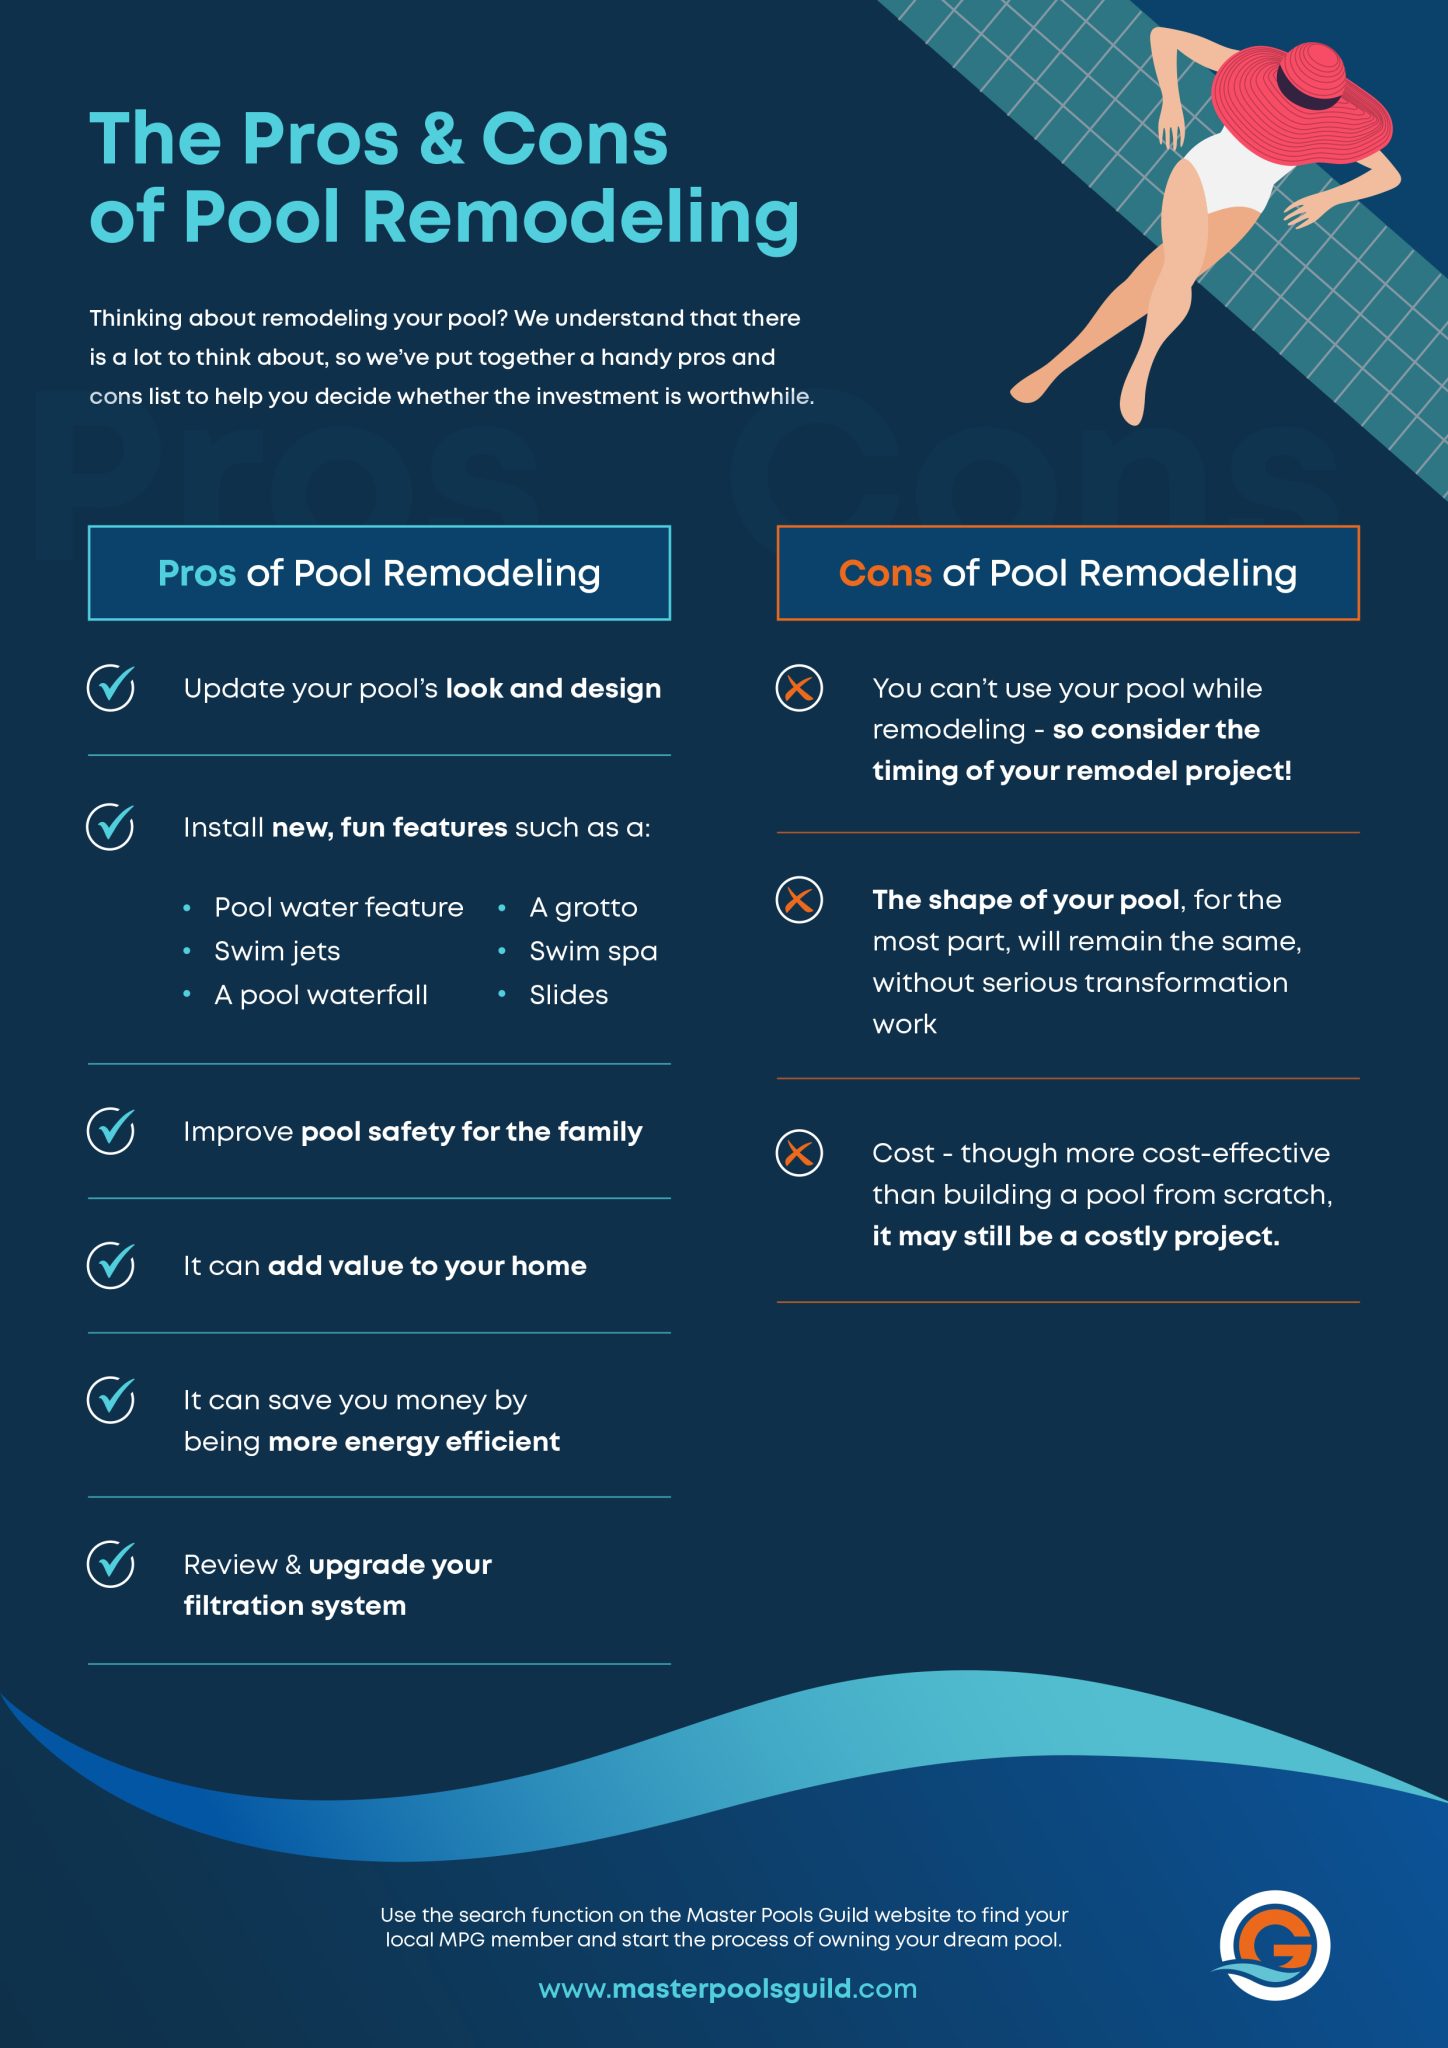 The Pros & Cons of Pool Remodelling